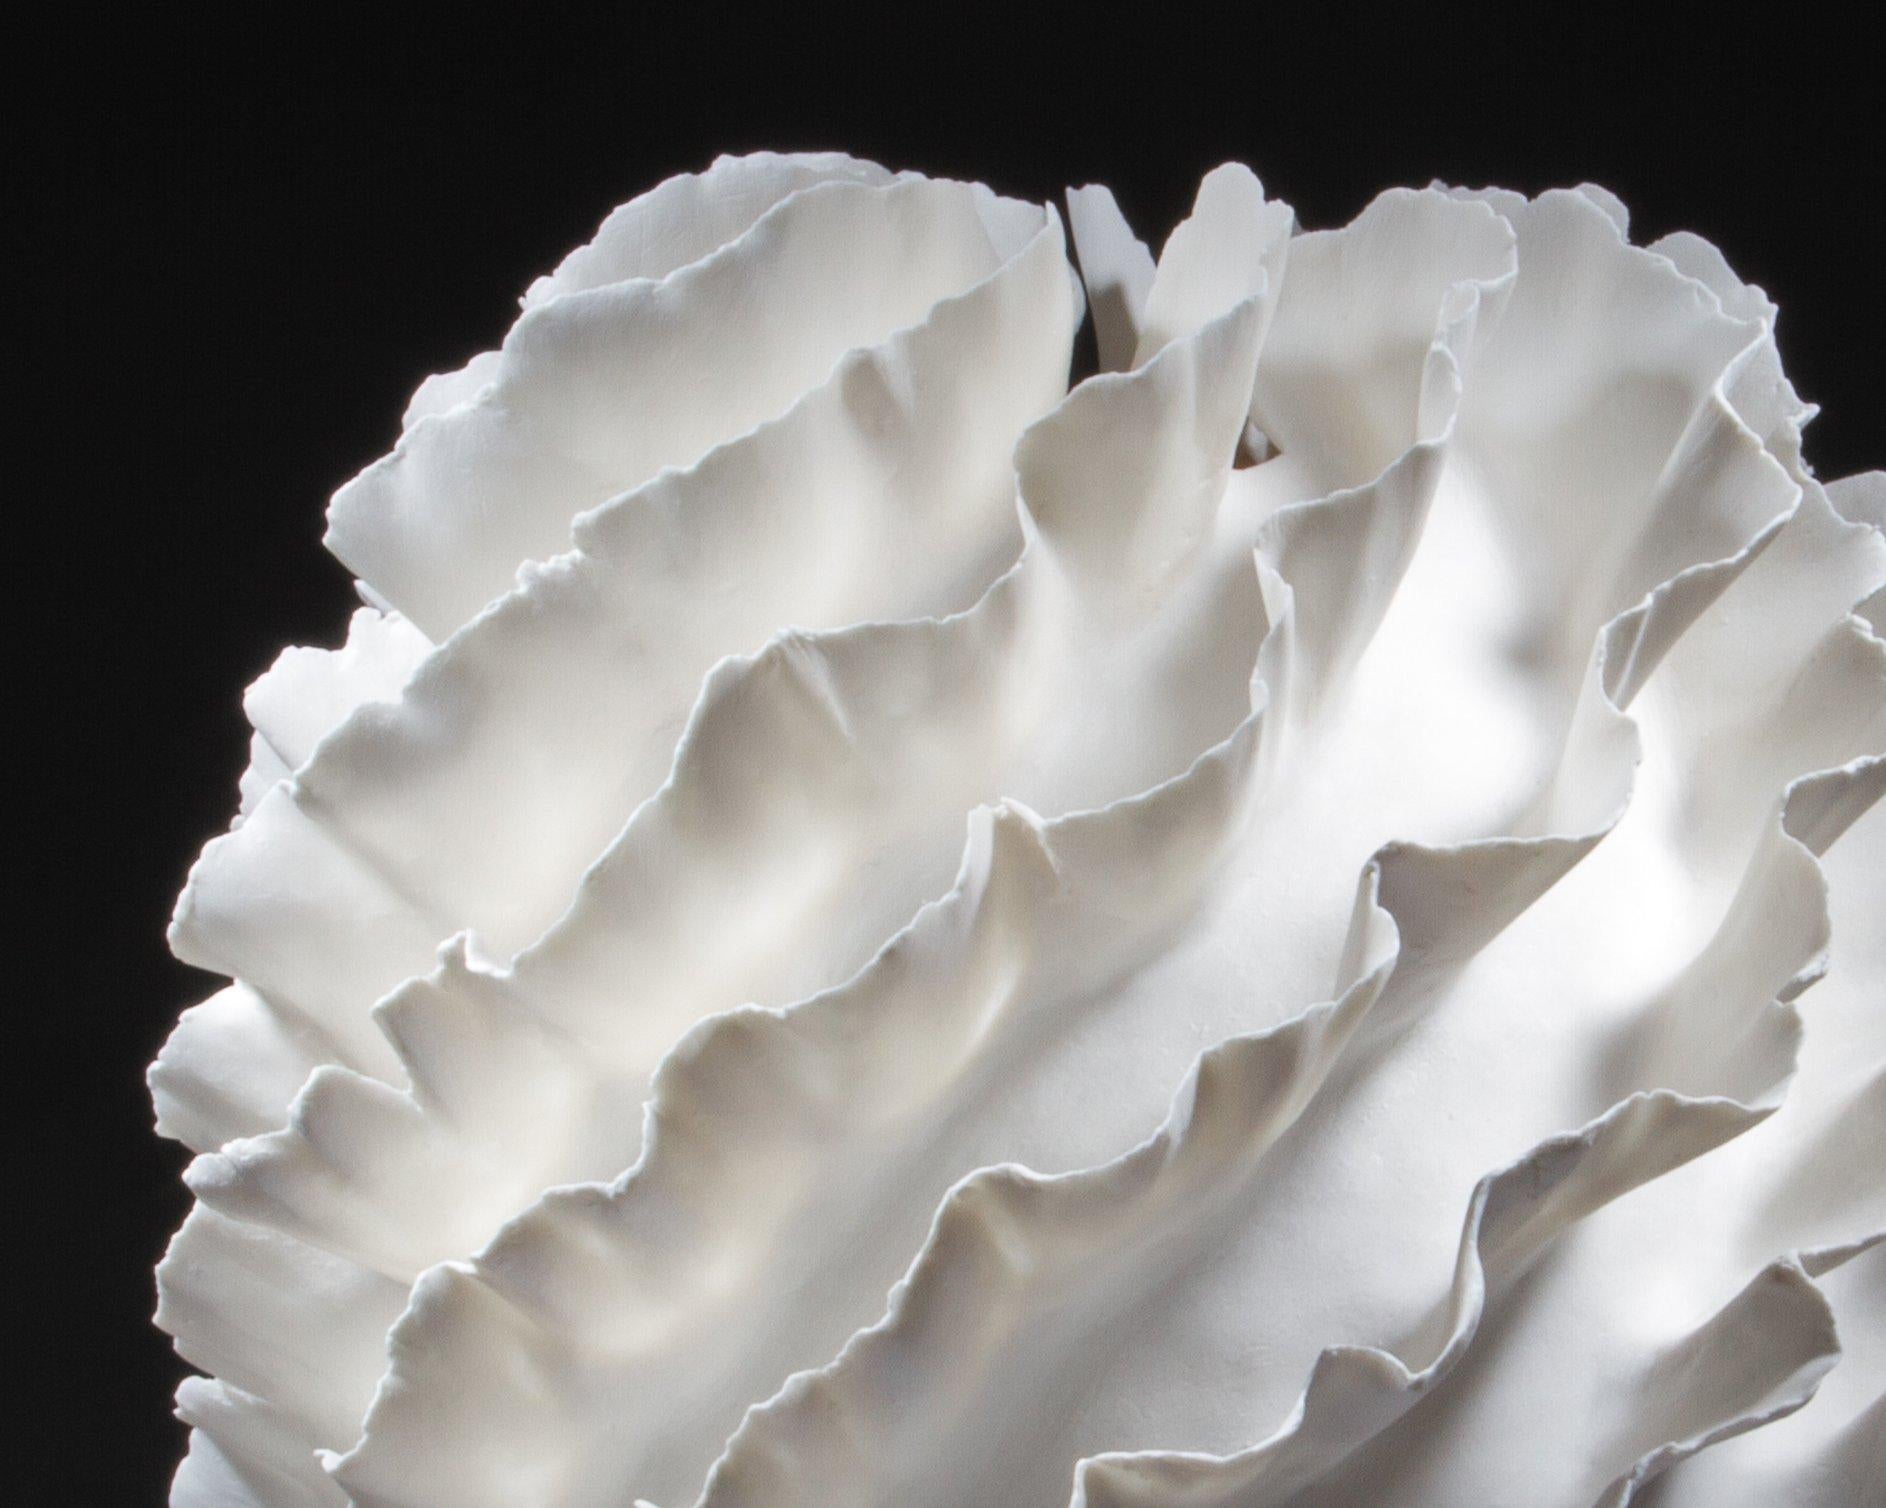 Coral Flower II, 2023, (Porcelain, C. 14.5 in. h x 10.6 in. diam., Object No.: 4184)

Davolio’s sophisticated porcelain works and their organic and natural references are influenced by the Art Nouveau style, the keen interest in the mechanics of